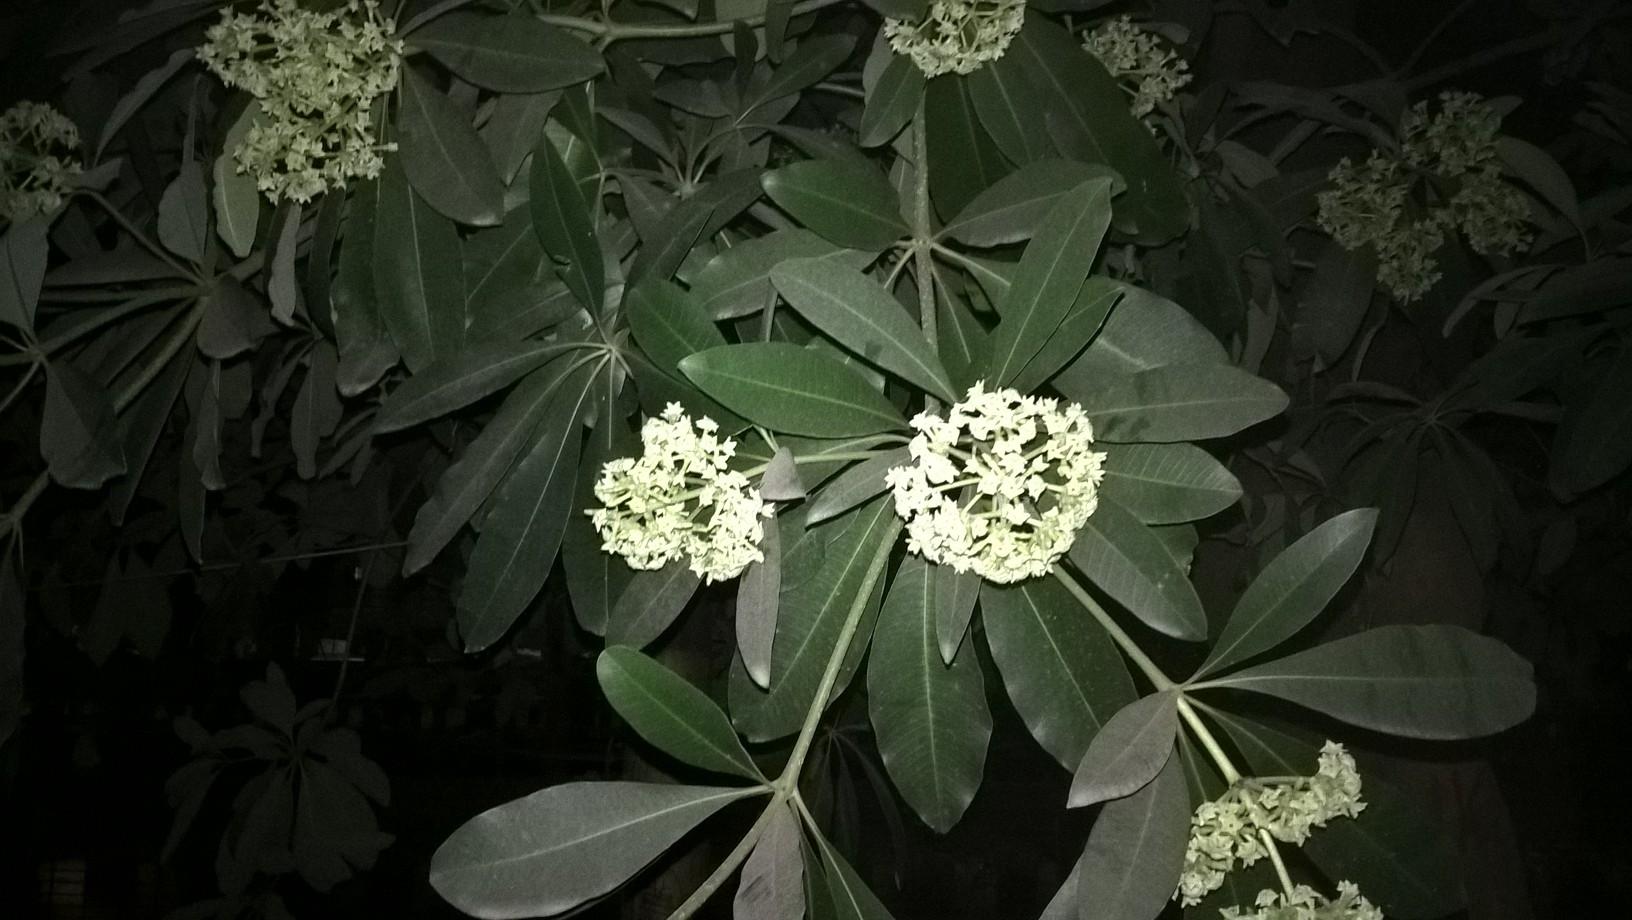 /wp-content/uploads/2020/10/the_leaves_and_flowers_at_night.jpg